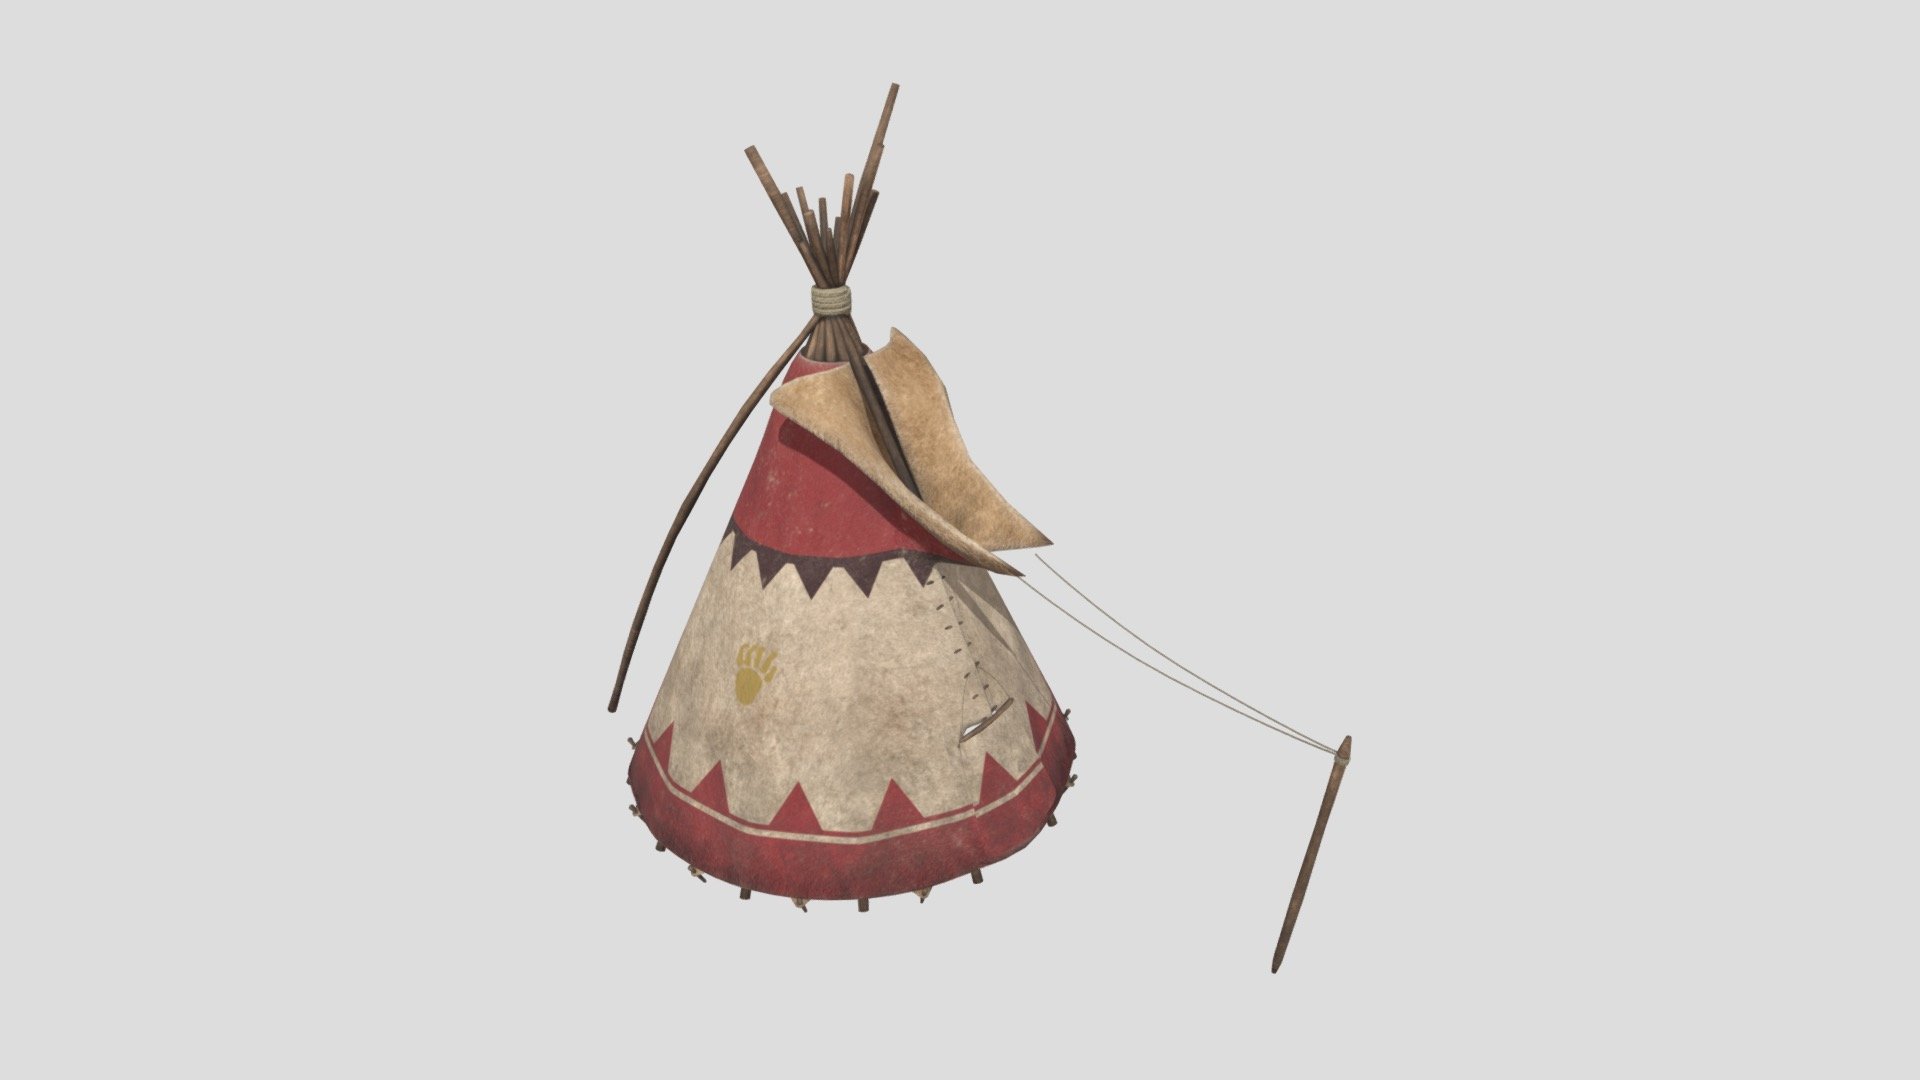 This Teepee Set is perfect for any period piece and great for creating native american settlemetns, The model comes with 4 texture variations and can easily be adjusted to create different looking variants. The model is high quality and viewable from all angles and Distances. The model has an interior texture seperate from the outside making it viewable from the interior as well.

This Includes:

The mesh
4K and 2K Texture Set (albedo, Roughness, Normal, Height)
4 Color Variants (Plain, Red, Brown, Blue)
The mesh is UV Unwrapped with vertex colors and can easily be retextured 3d model